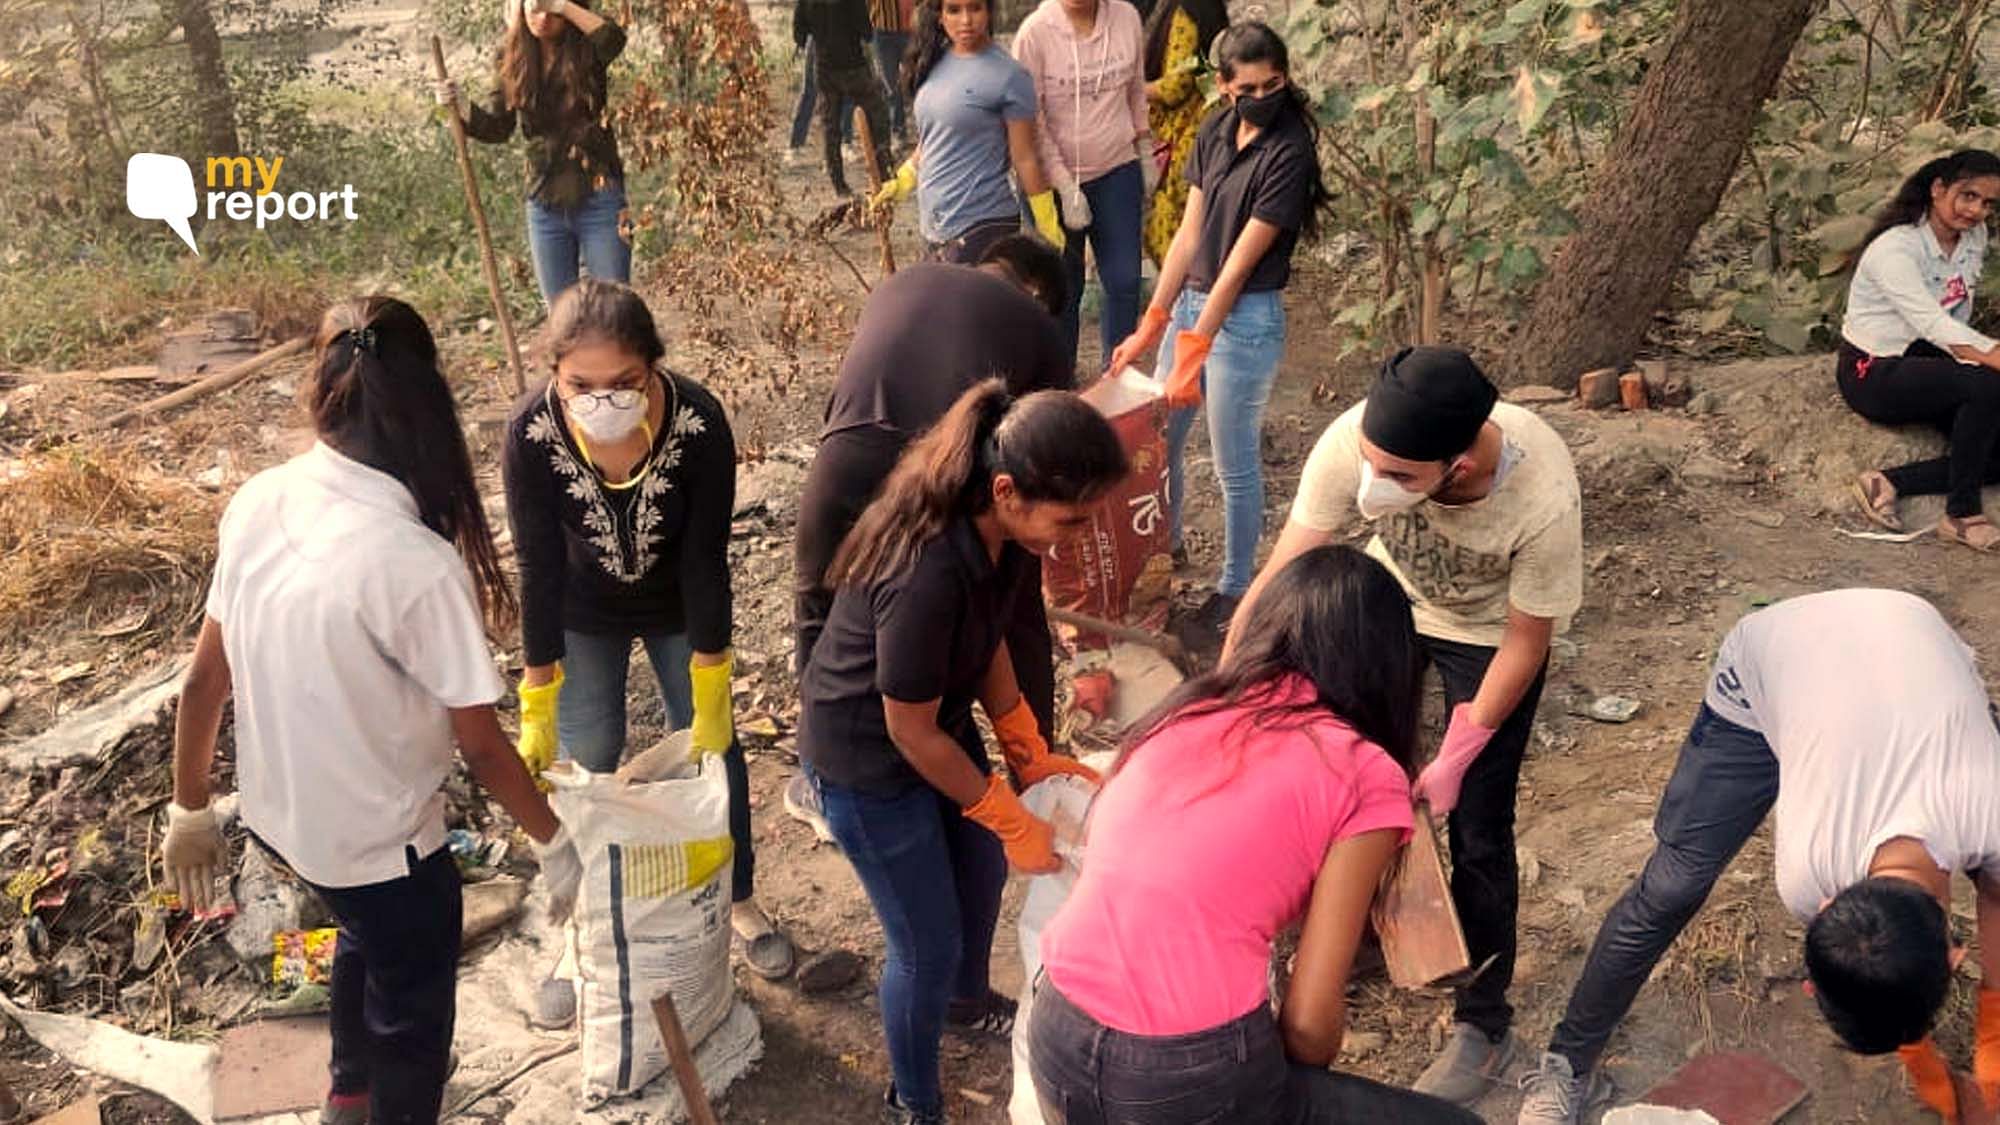 Citizens get together to clean Sector 18, Rohini.